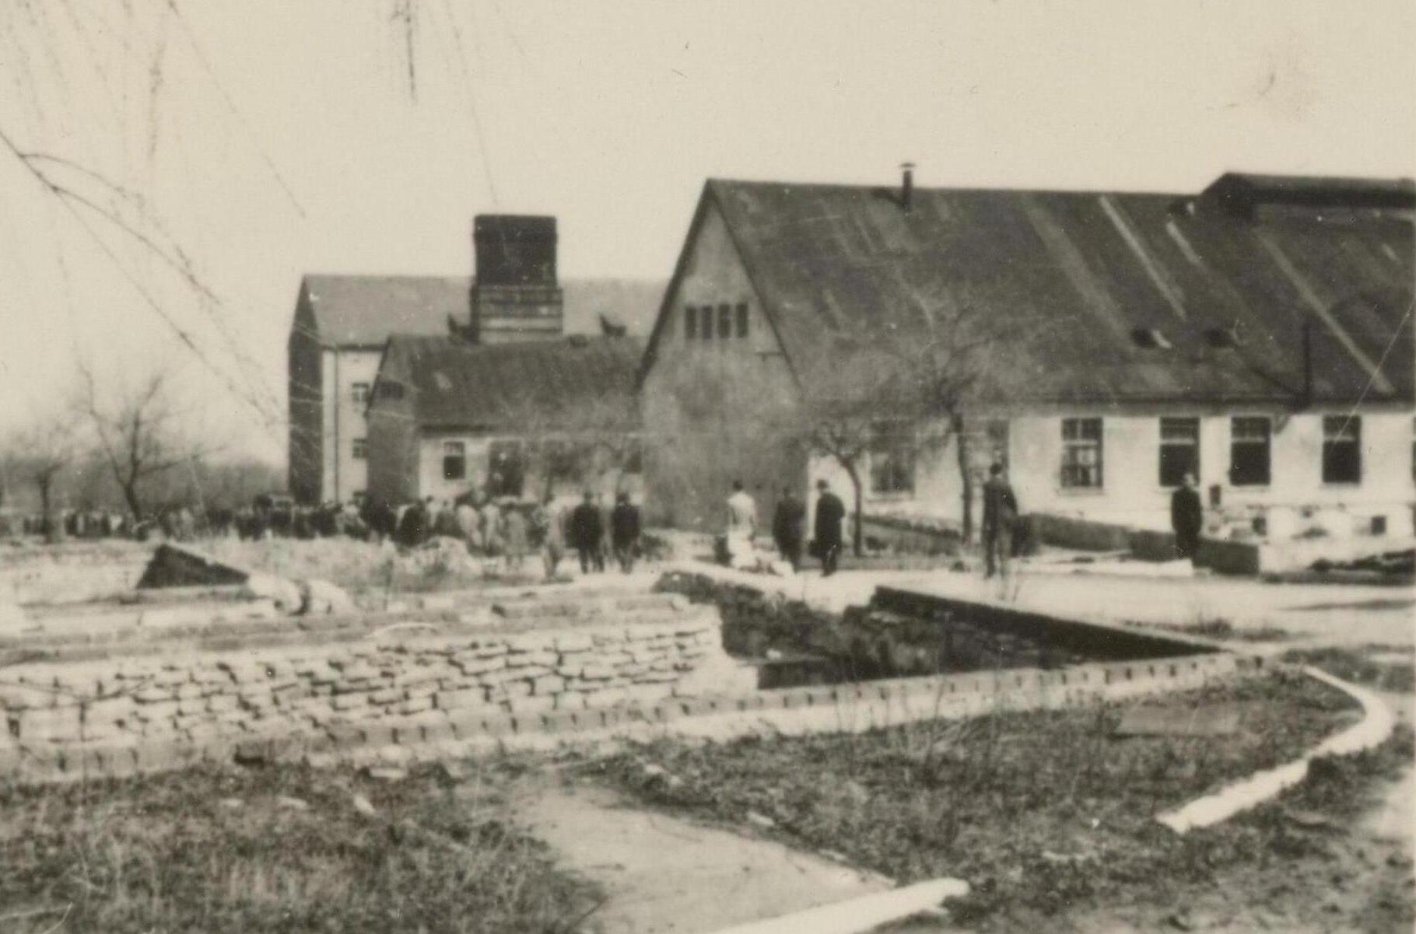 The photo shows, projecting into the picture from the left, three elongated buildings standing one behind the other. A slightly sloping path leads past them, groups of people in civilian clothes are walking on it. The two buildings in front have one story and a high gable roof. The rear building has three stories. 